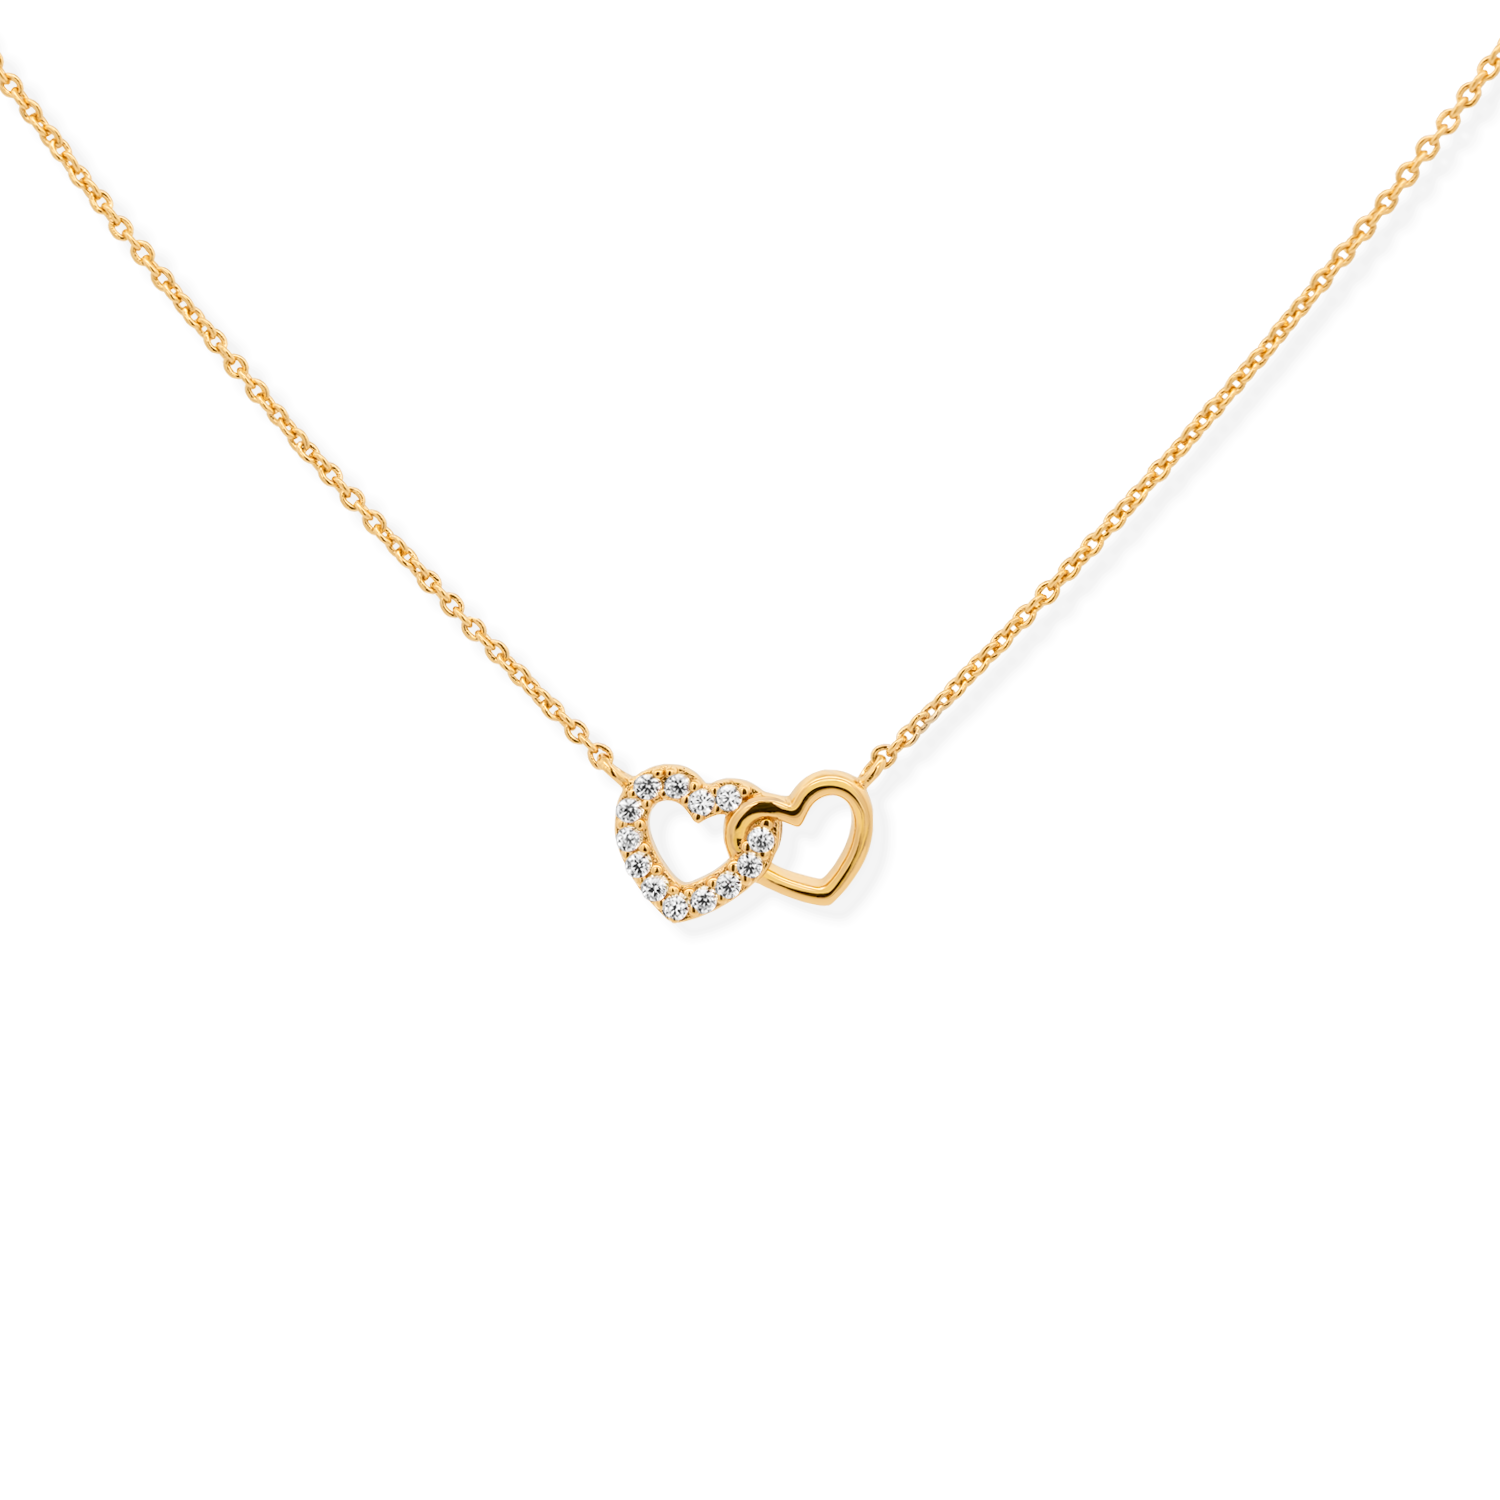 Elegant and dainty necklace with cubic zirconia stones in gold.